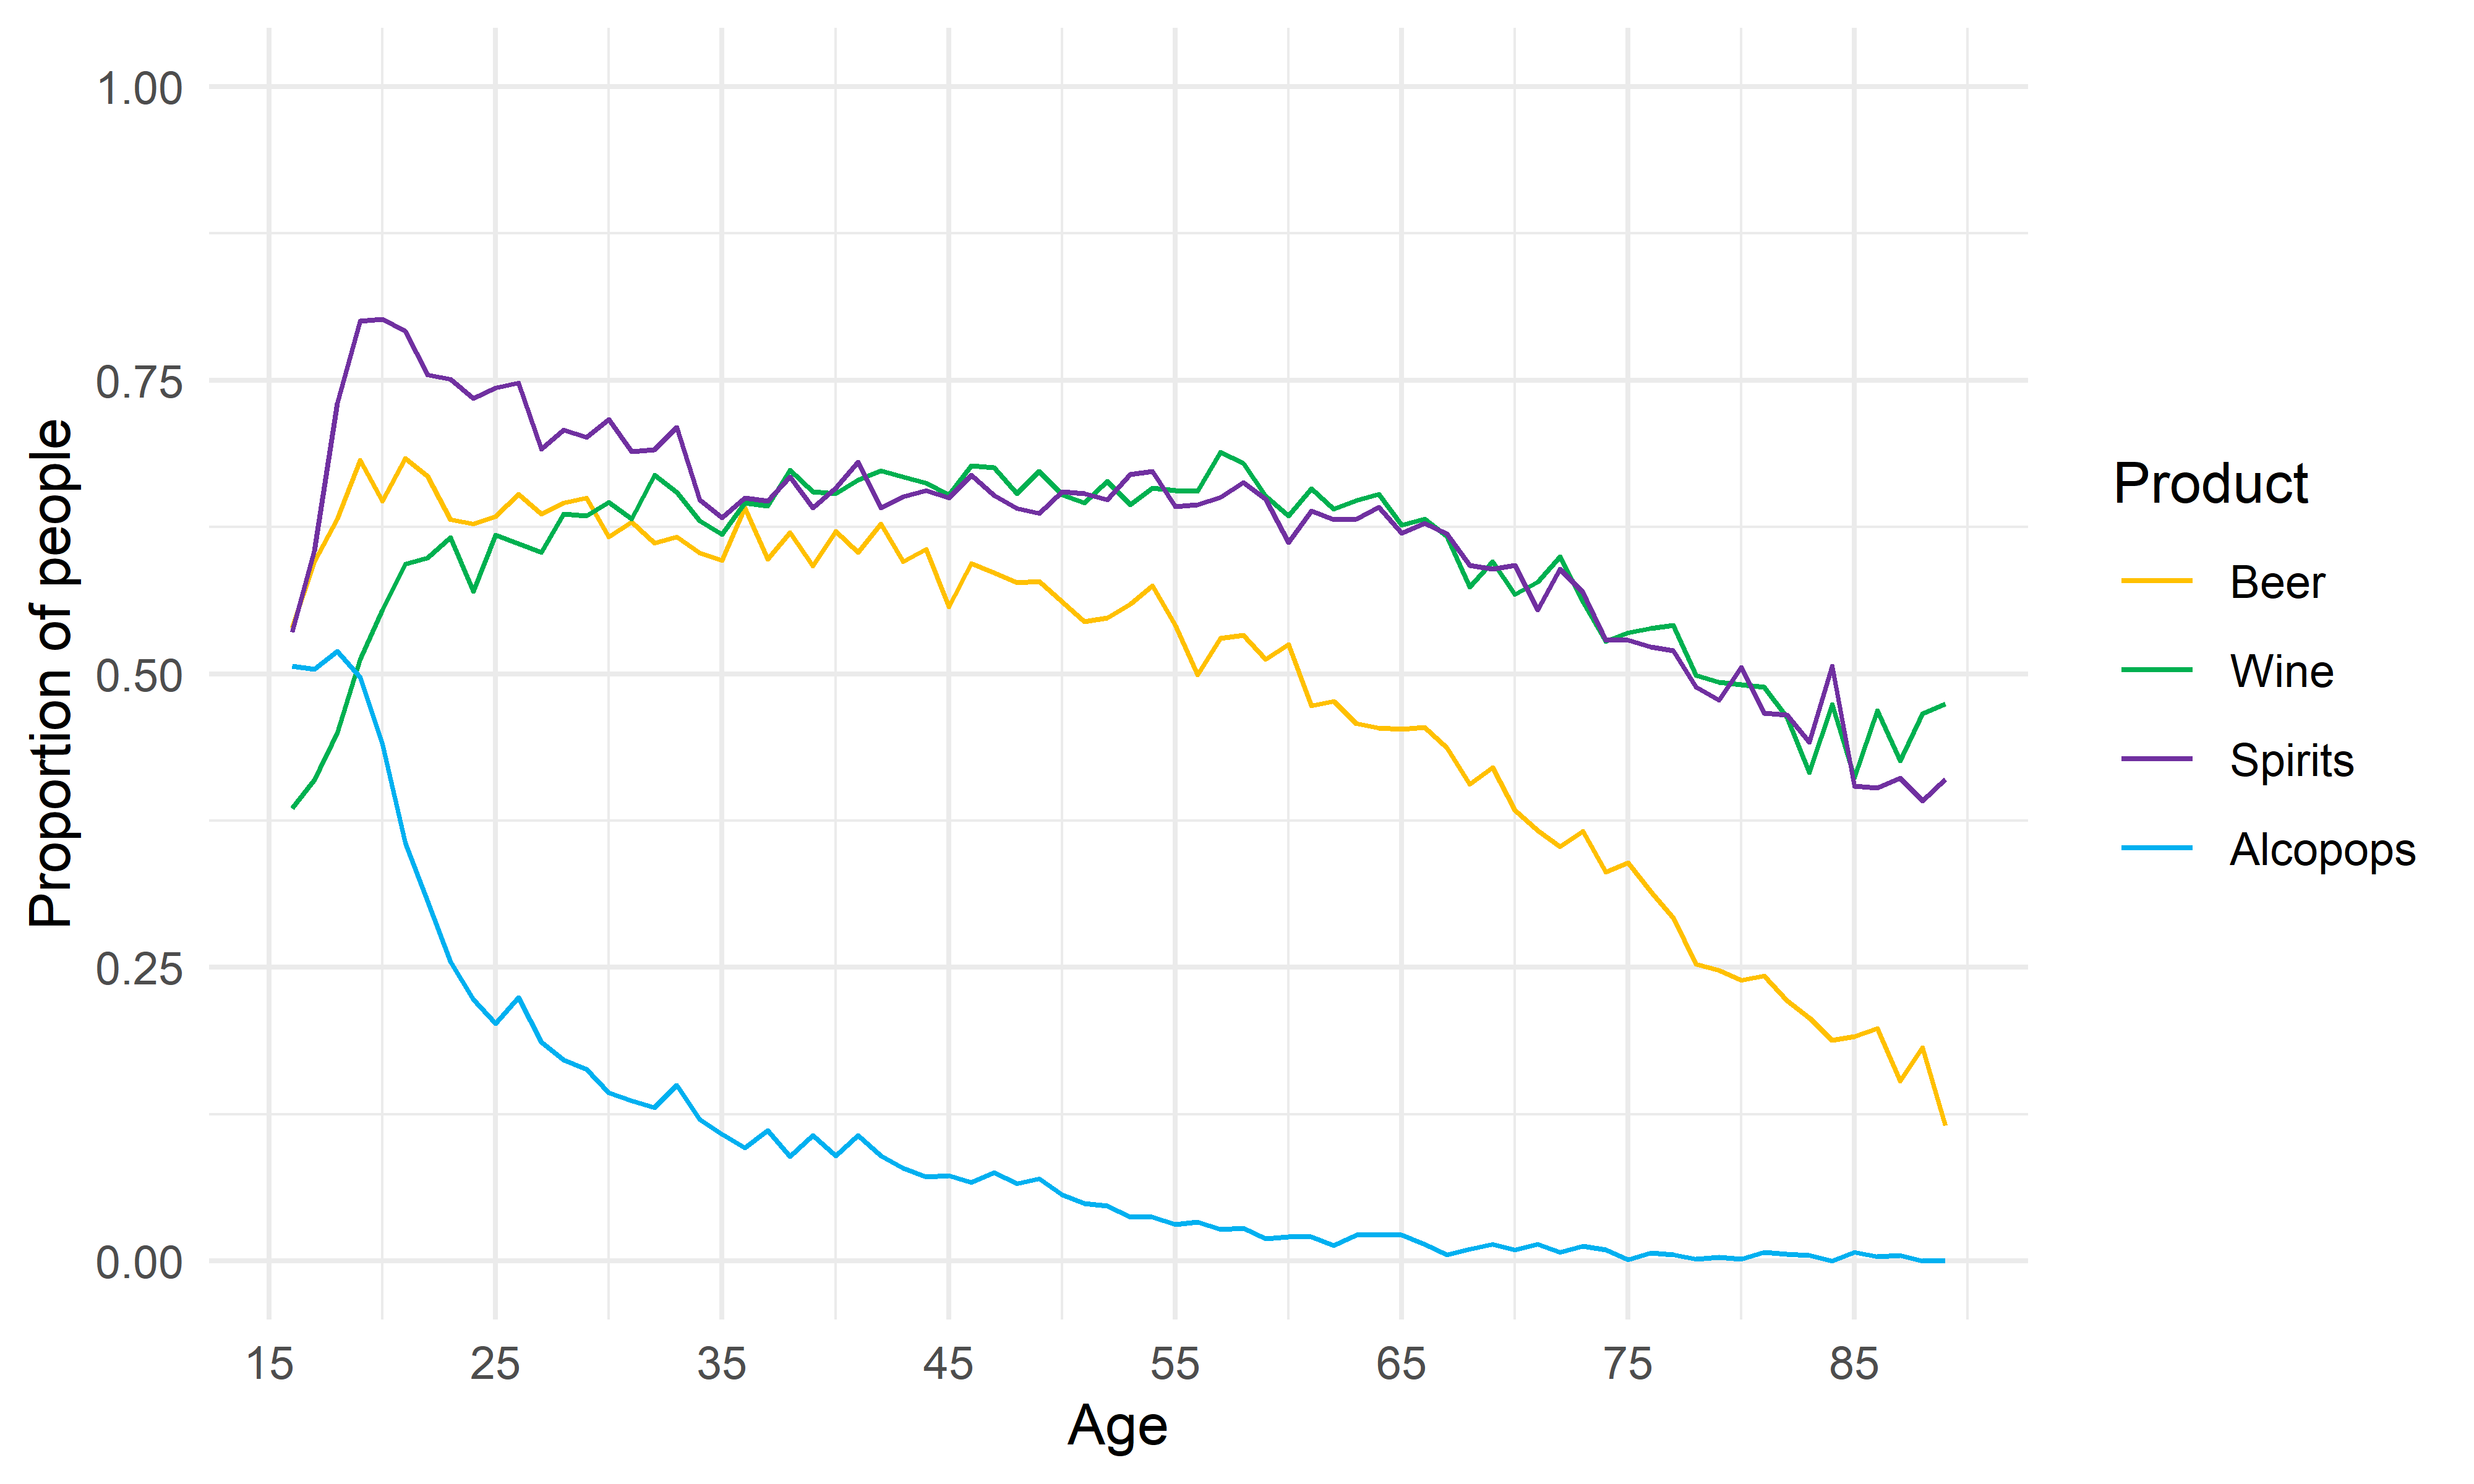 Figure 21. Age trends in the proportions of people who drink each type of alcoholic drink.